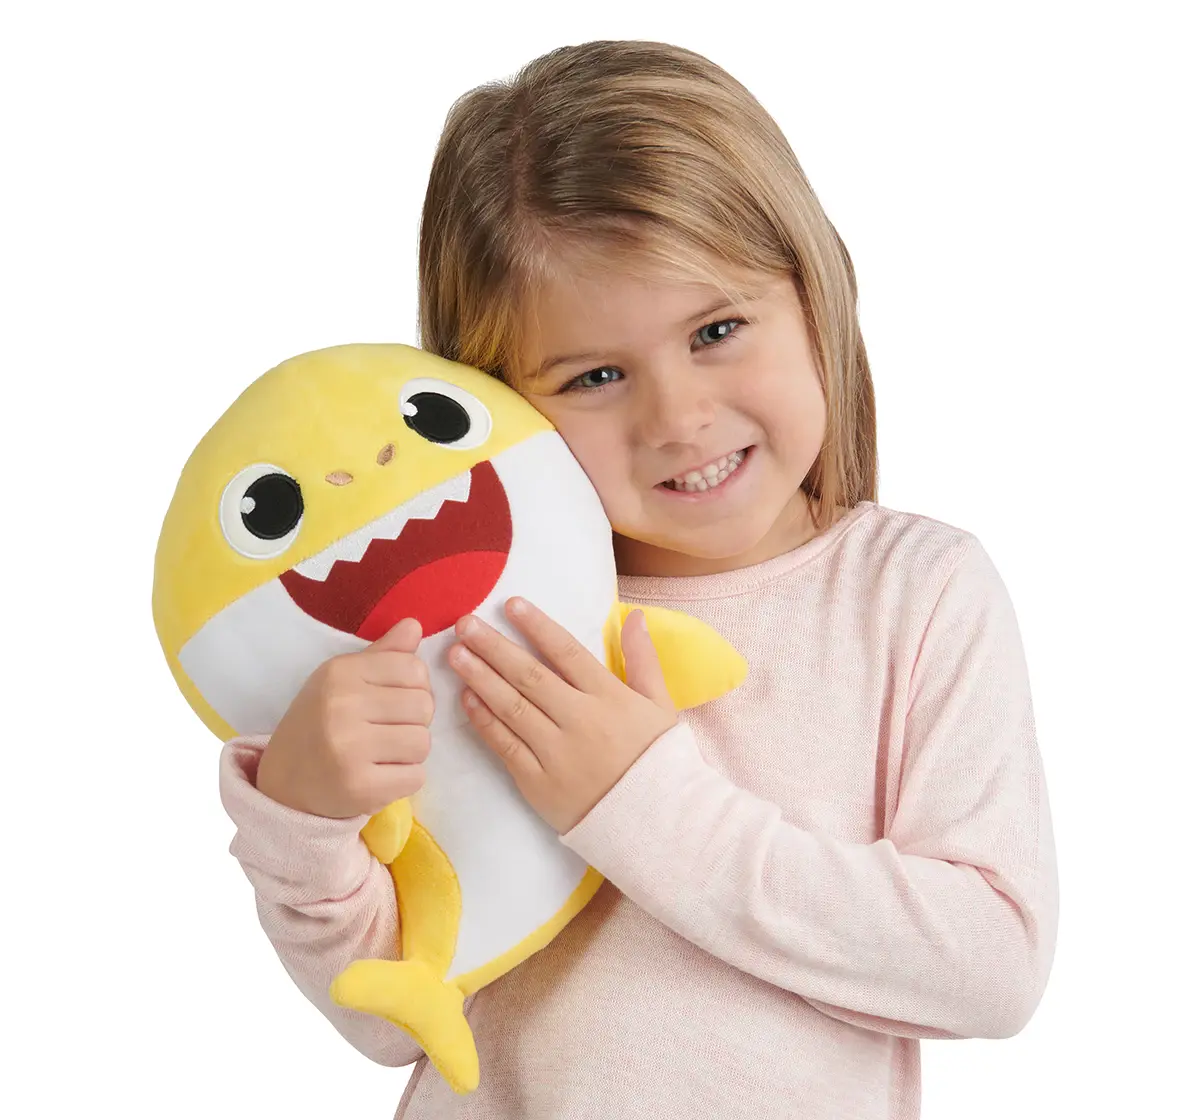 Baby Shark 18” Plush with sound for Kids age 3Y+